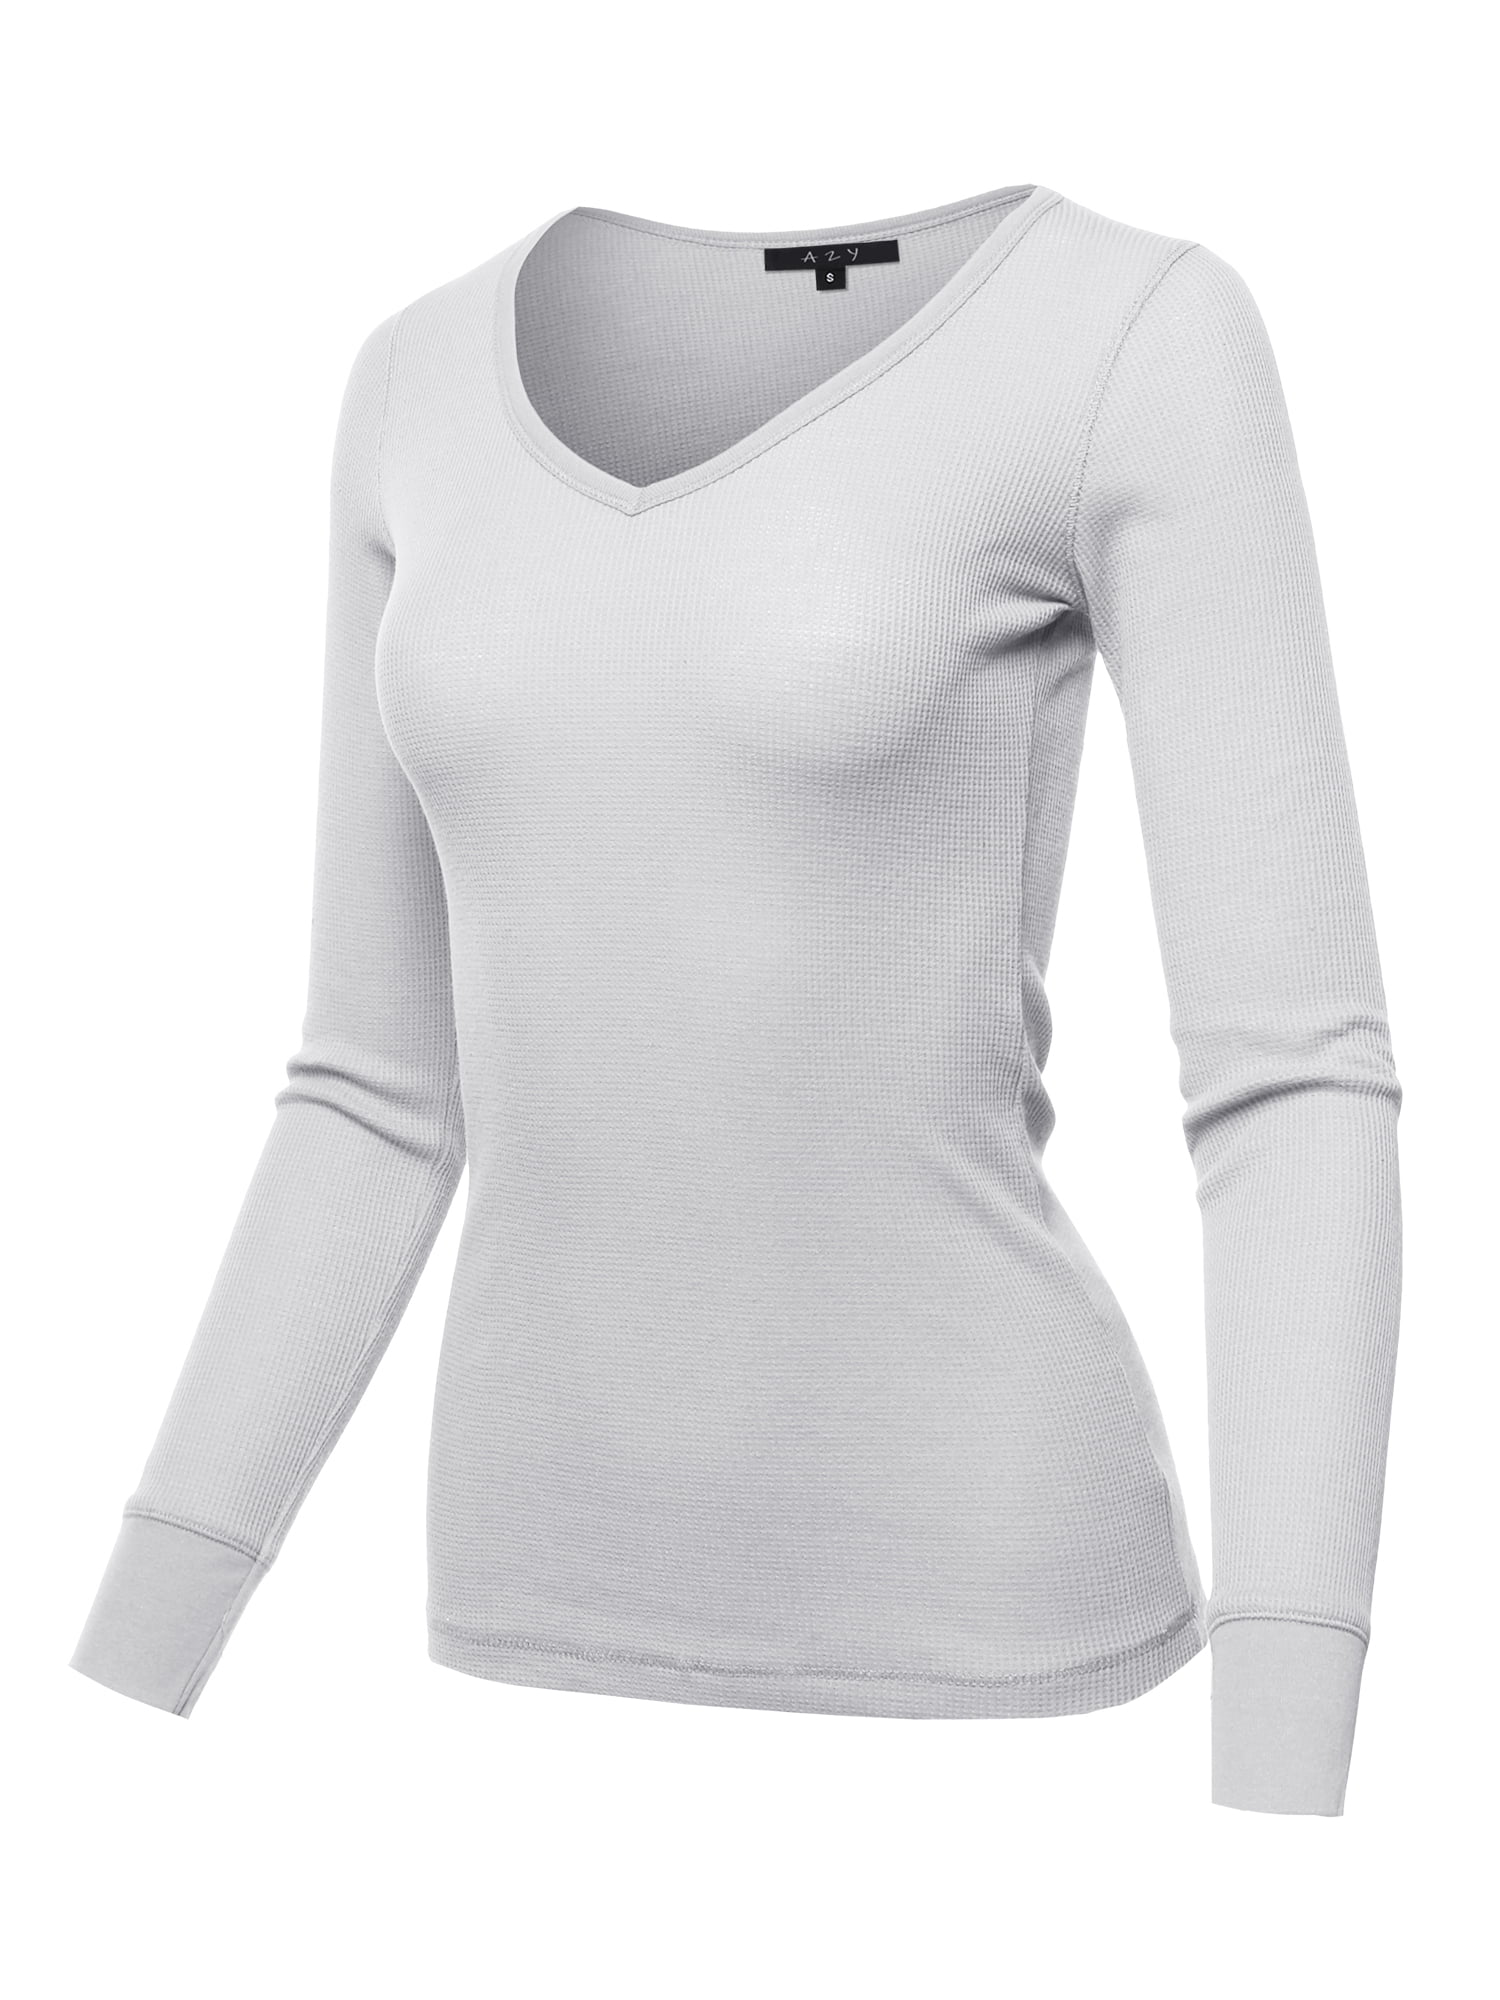 A2y A2y Womens Basic Solid Long Sleeve V Neck Fitted Thermal Top Shirt White S 